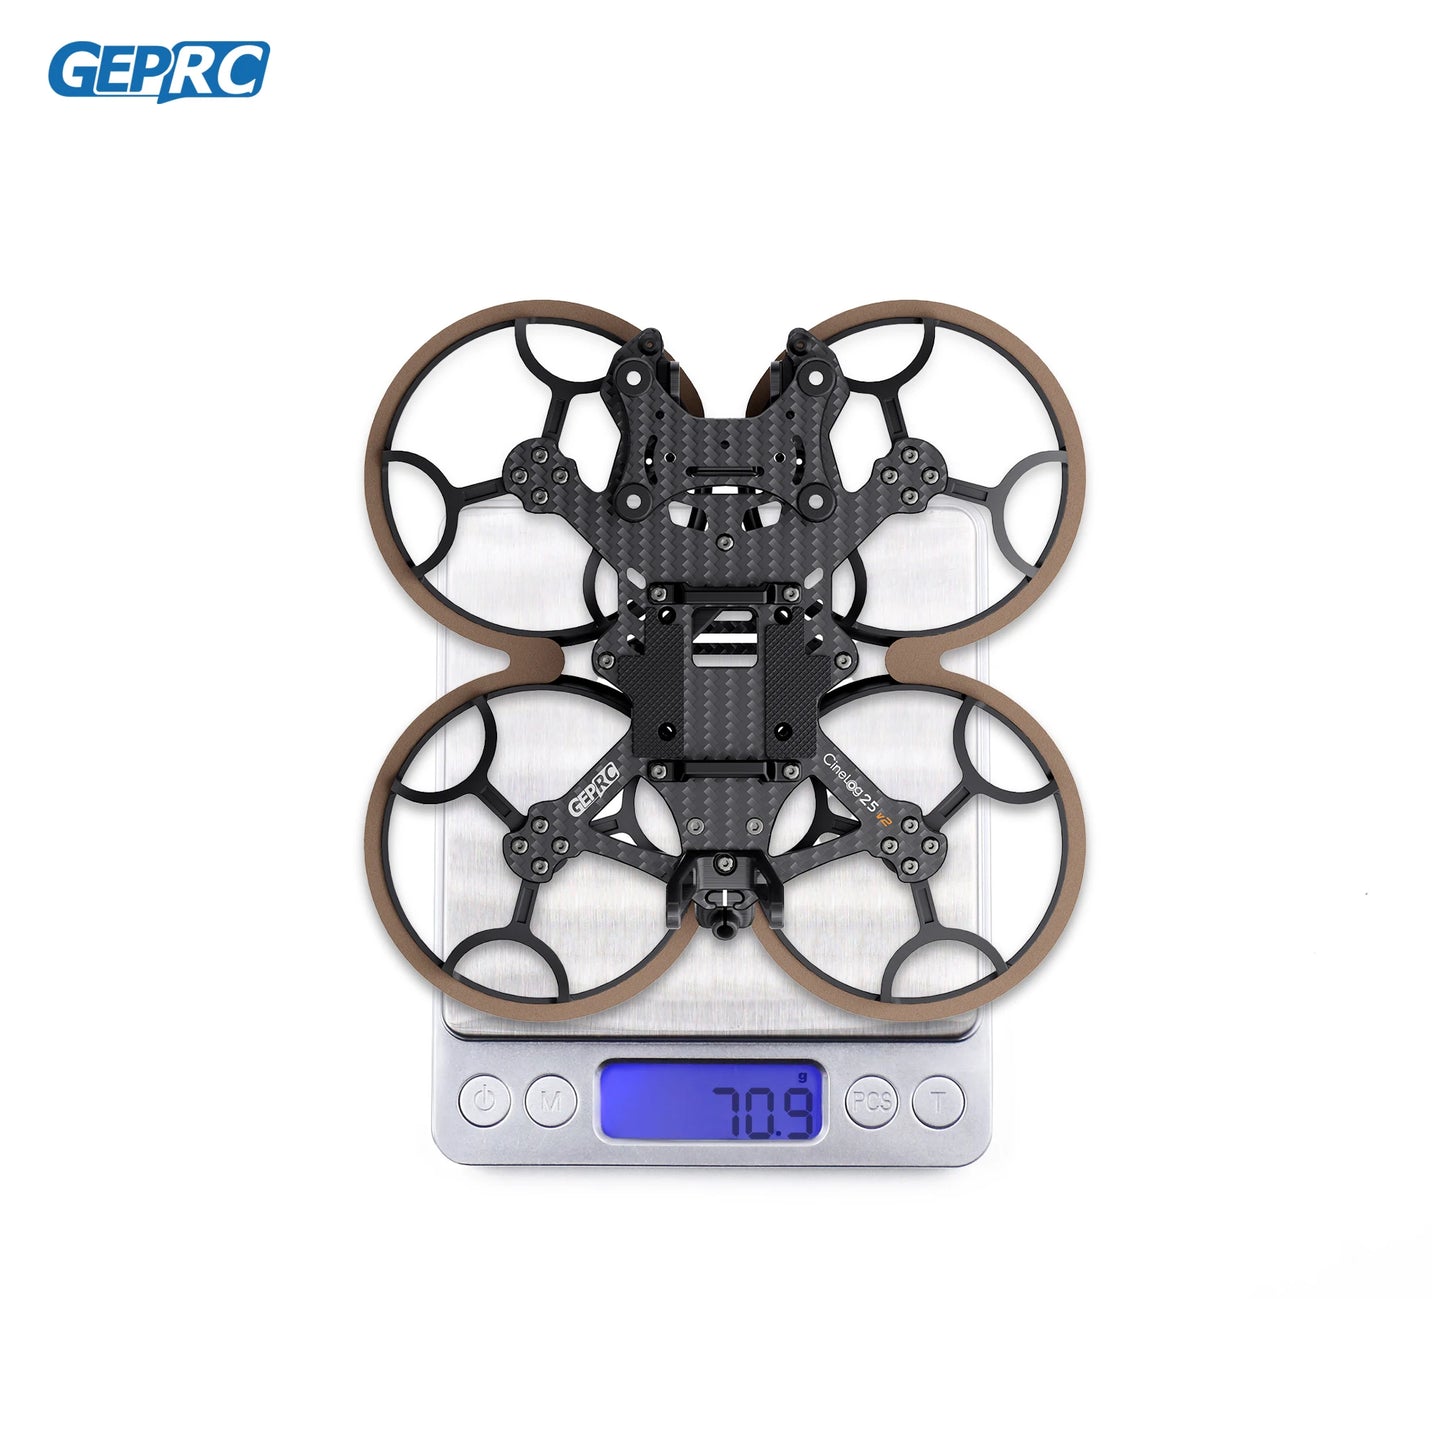 GEPRC GEP-CL25 V2 Frame - 2.5 Inch Parts Propeller Accessory Base Quadcopter FPV Freestyle RC Racing Drone Cinelog25 V2